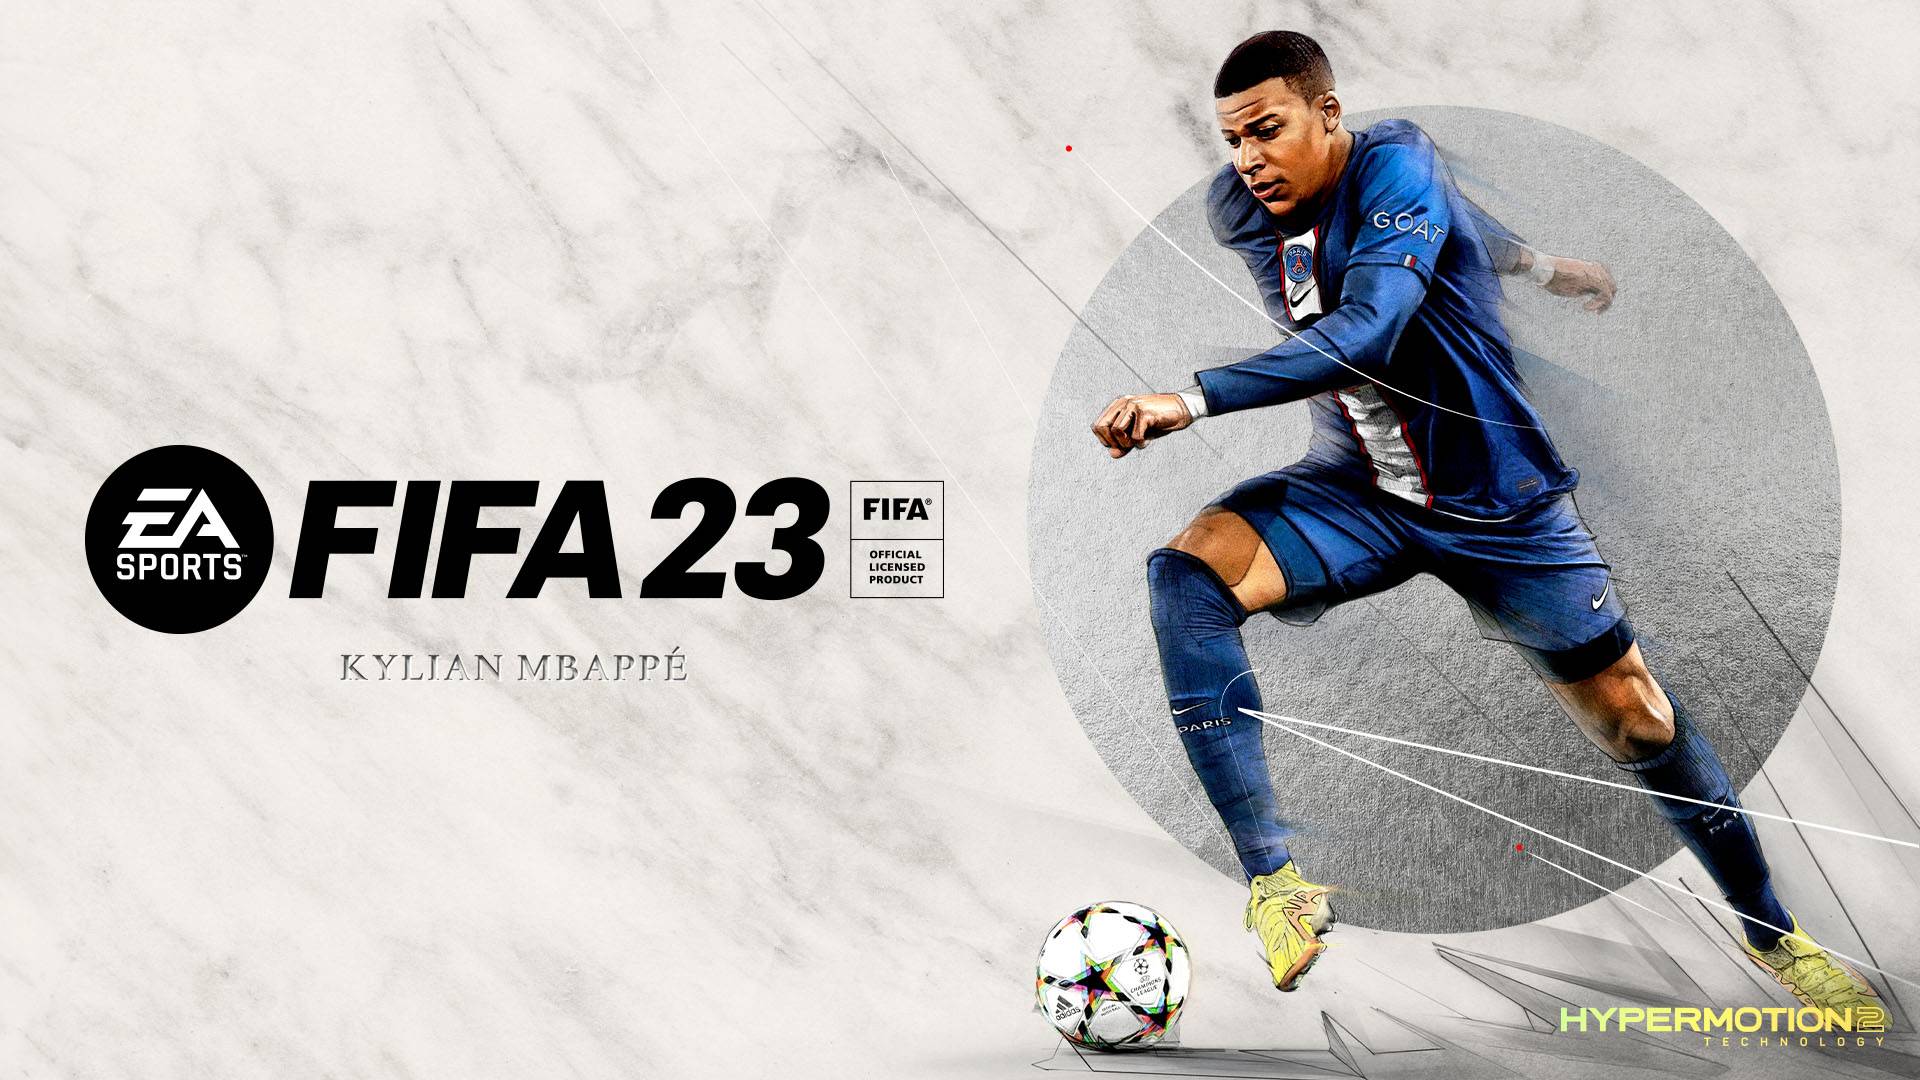 Mbappe FIFA 23 cover